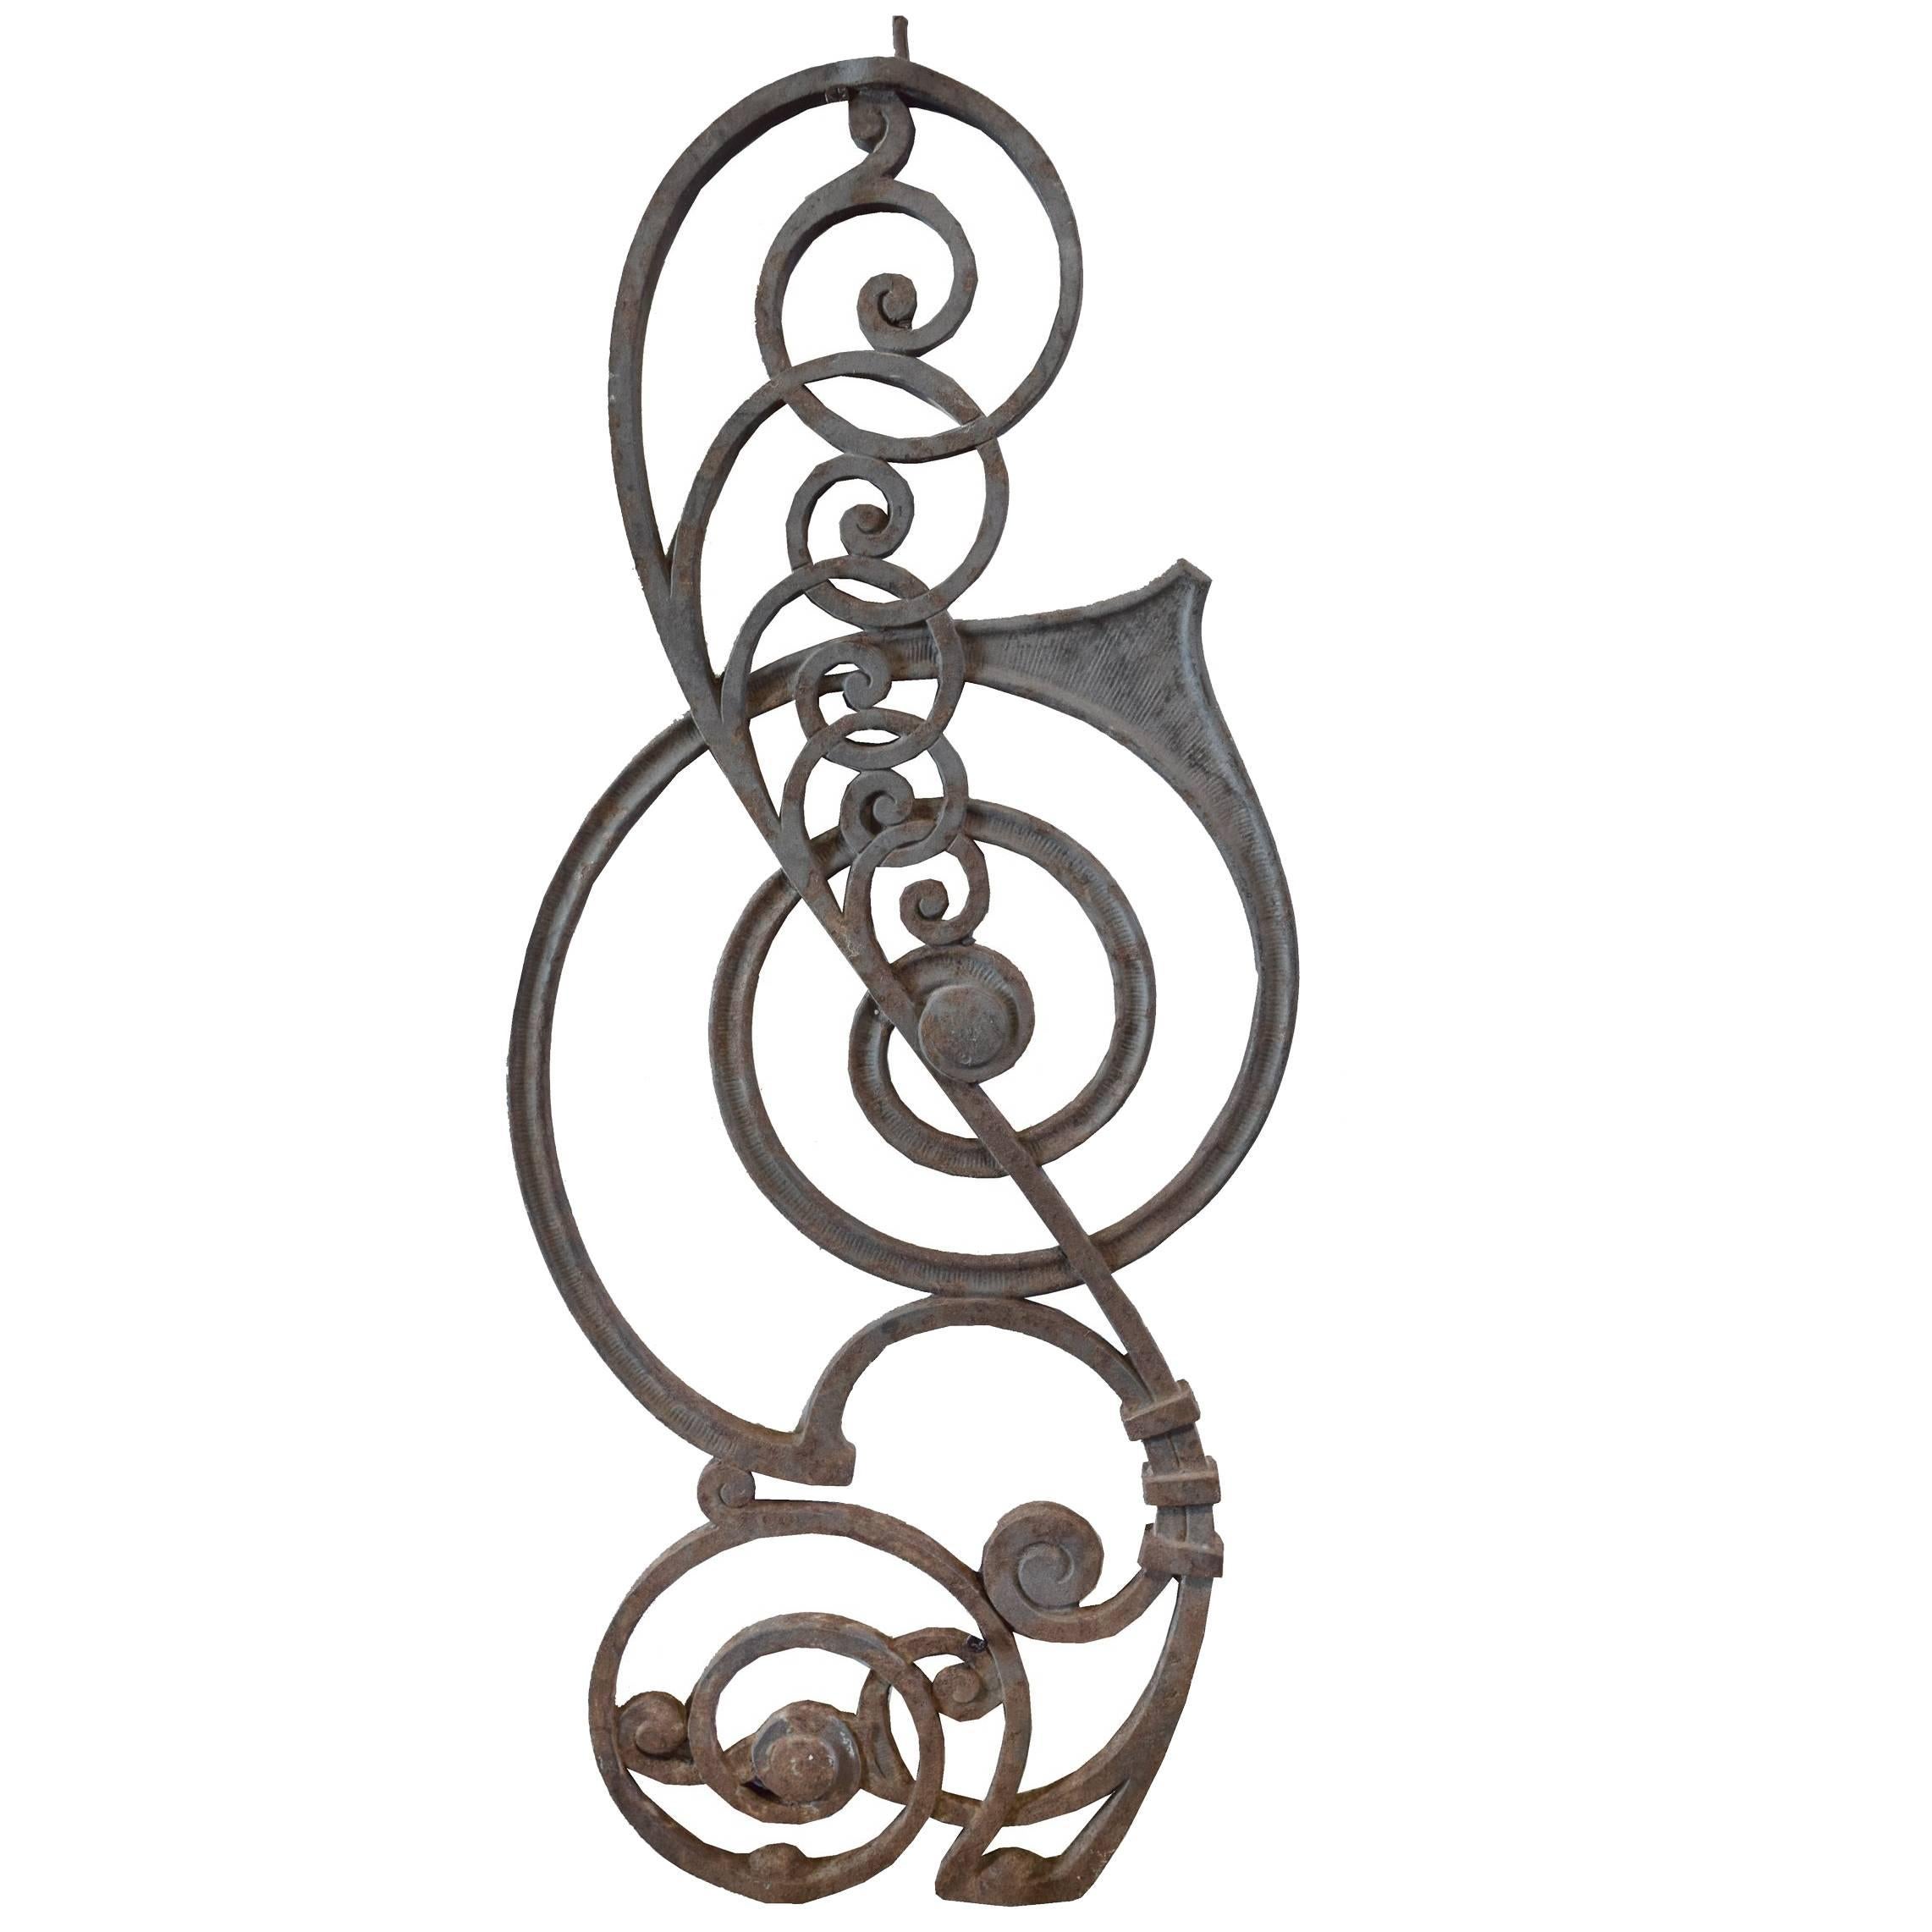 Cast Iron Stair Balustrade from the Kansas City Board of Trade